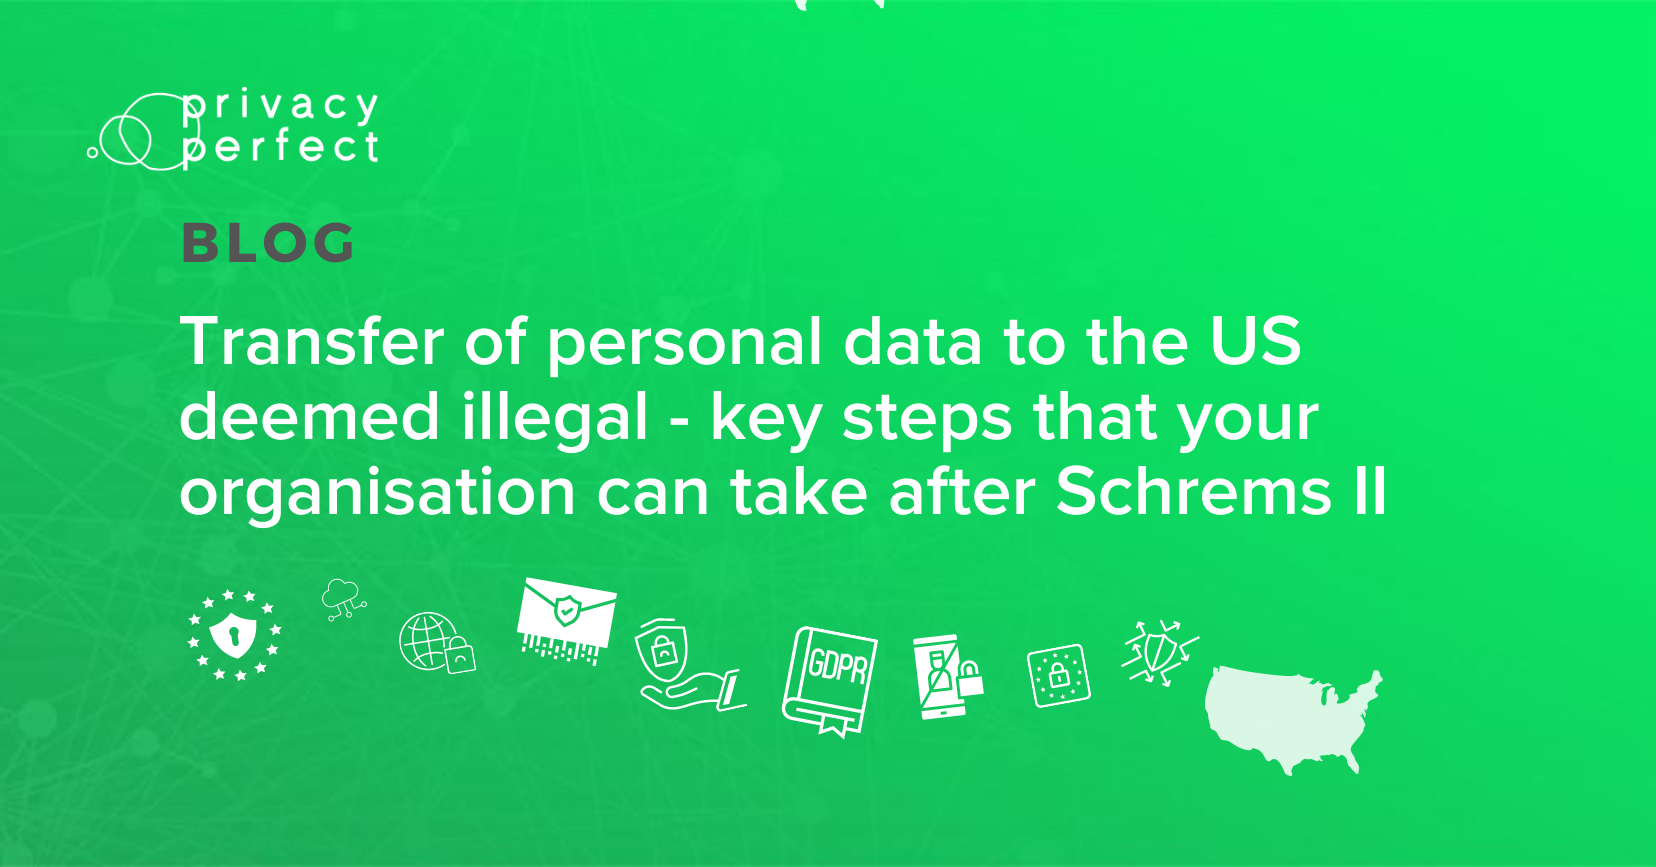 Transfer of personal data to the US deemed illegal - key steps that your organisation can take after Schrems II